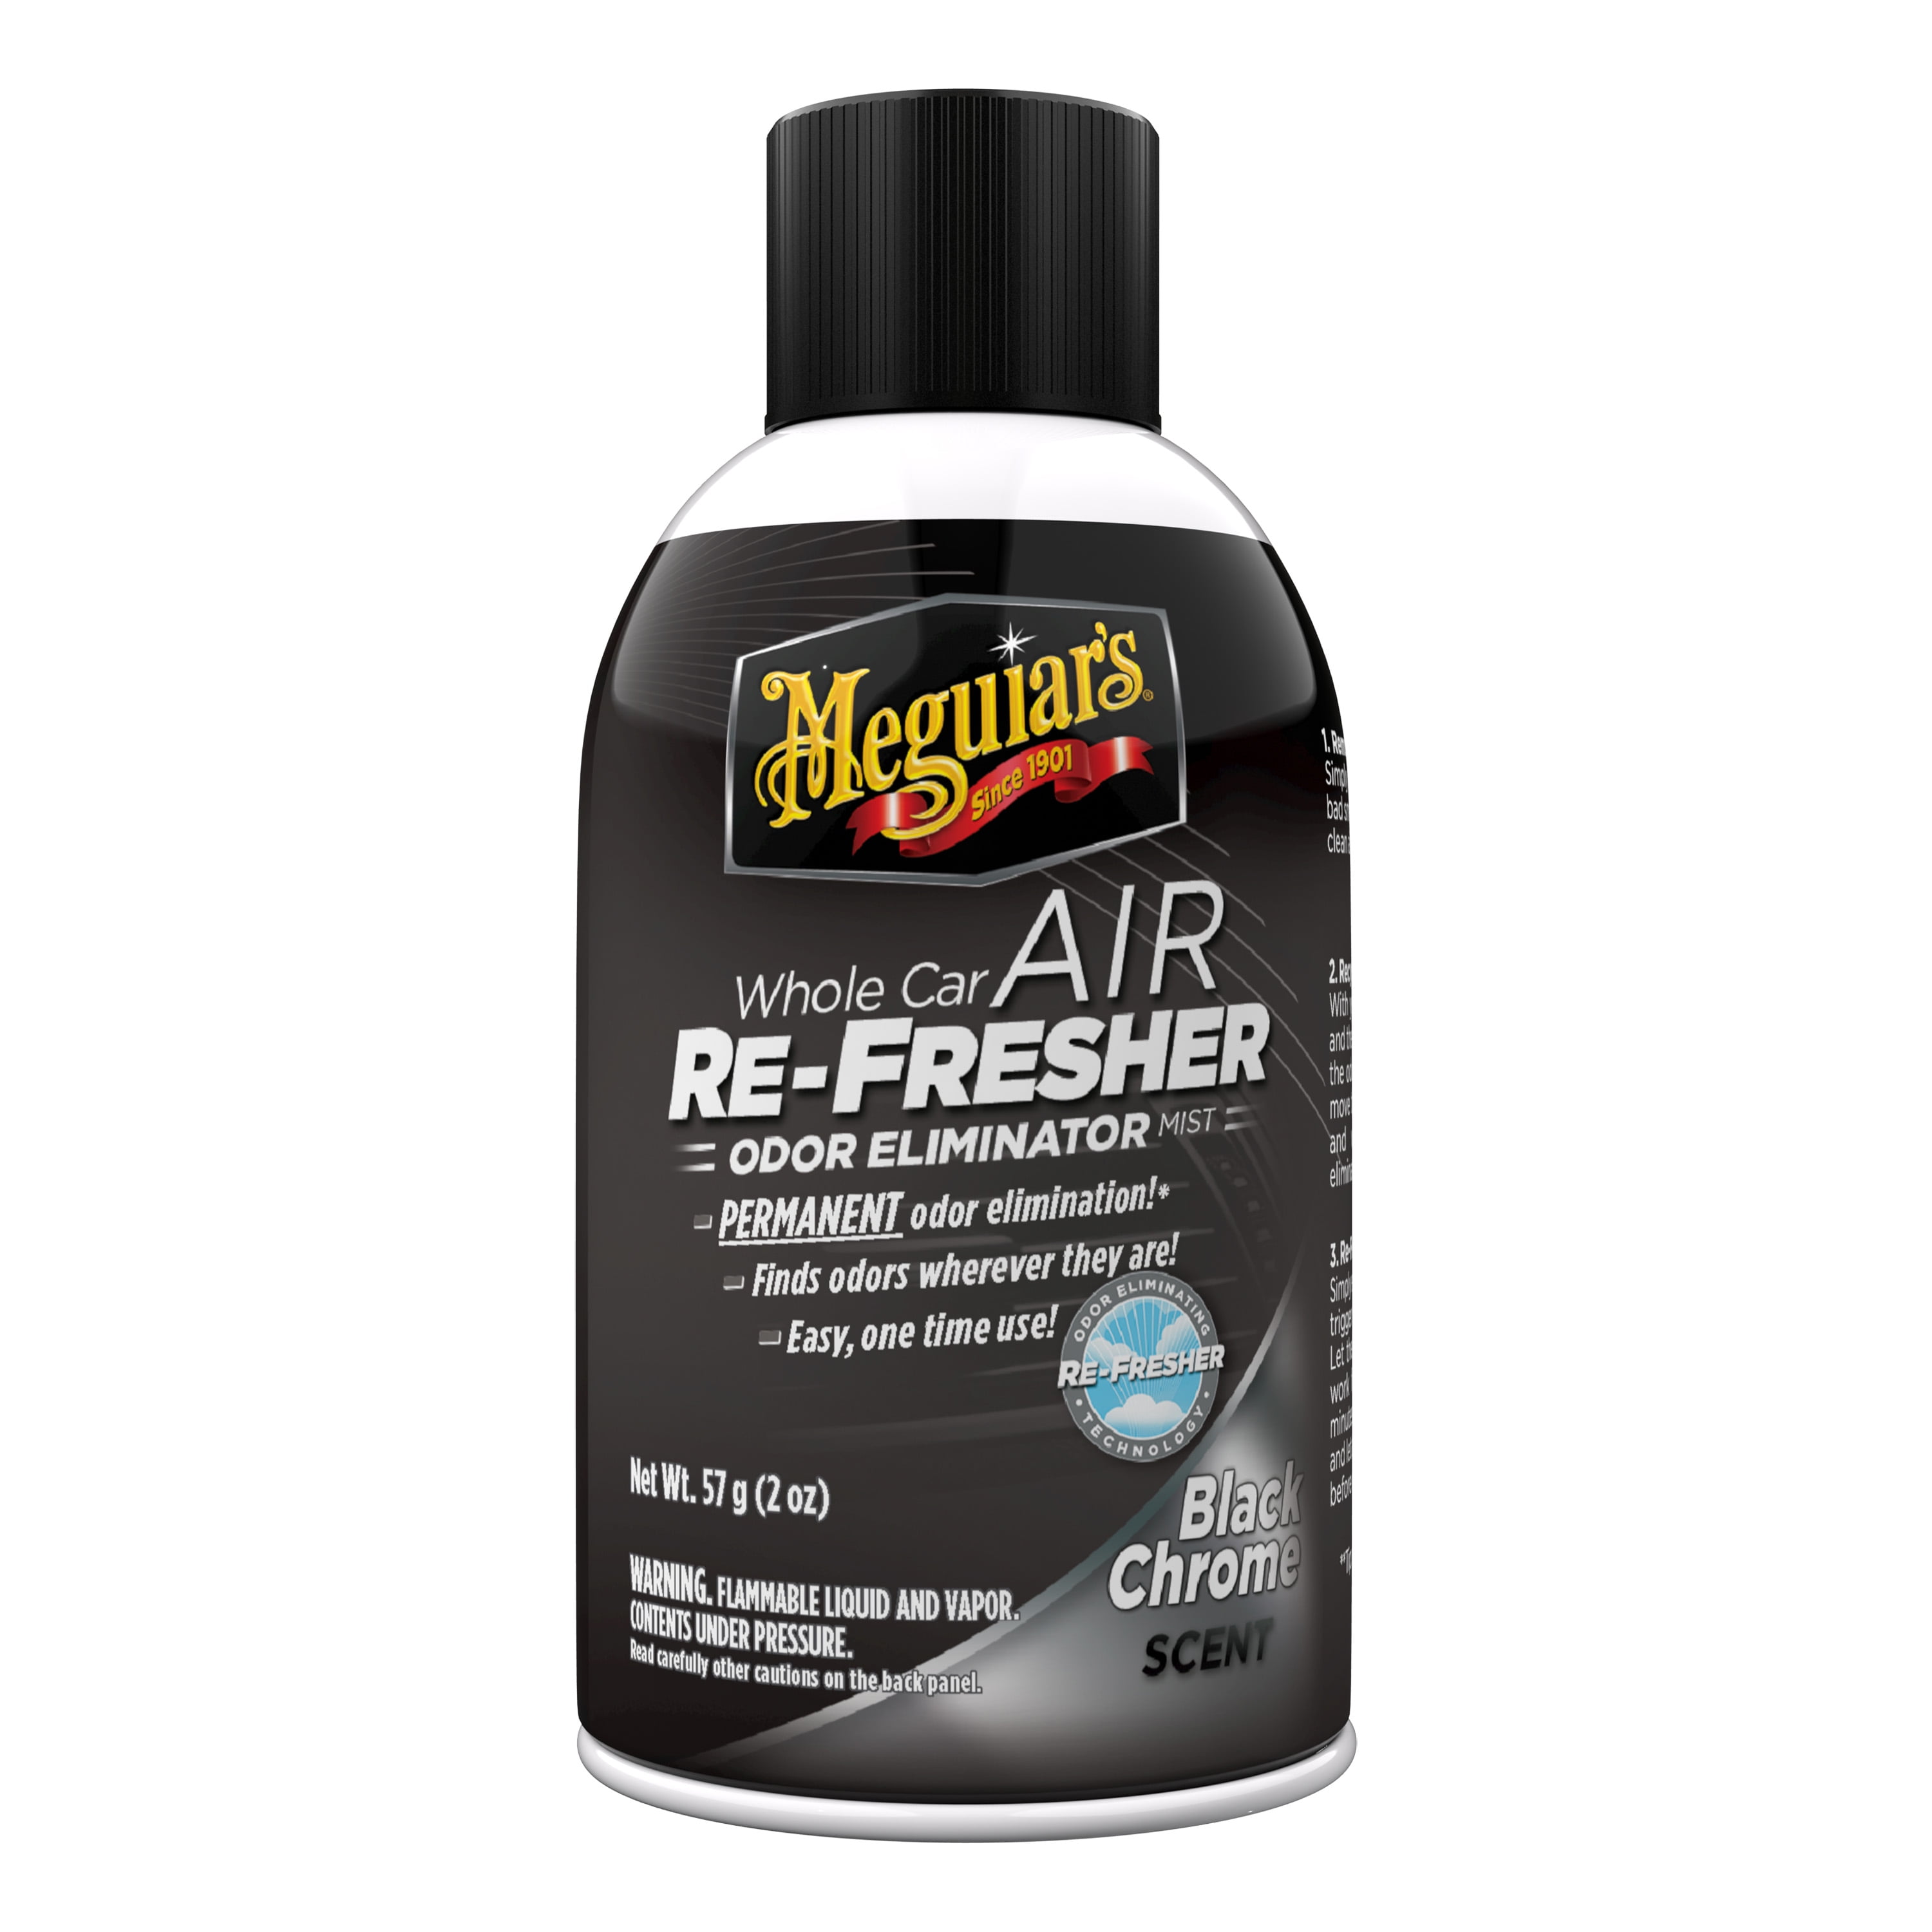 How to Remove Car Odors with Meguiar's Air Re-Fresher Mist 